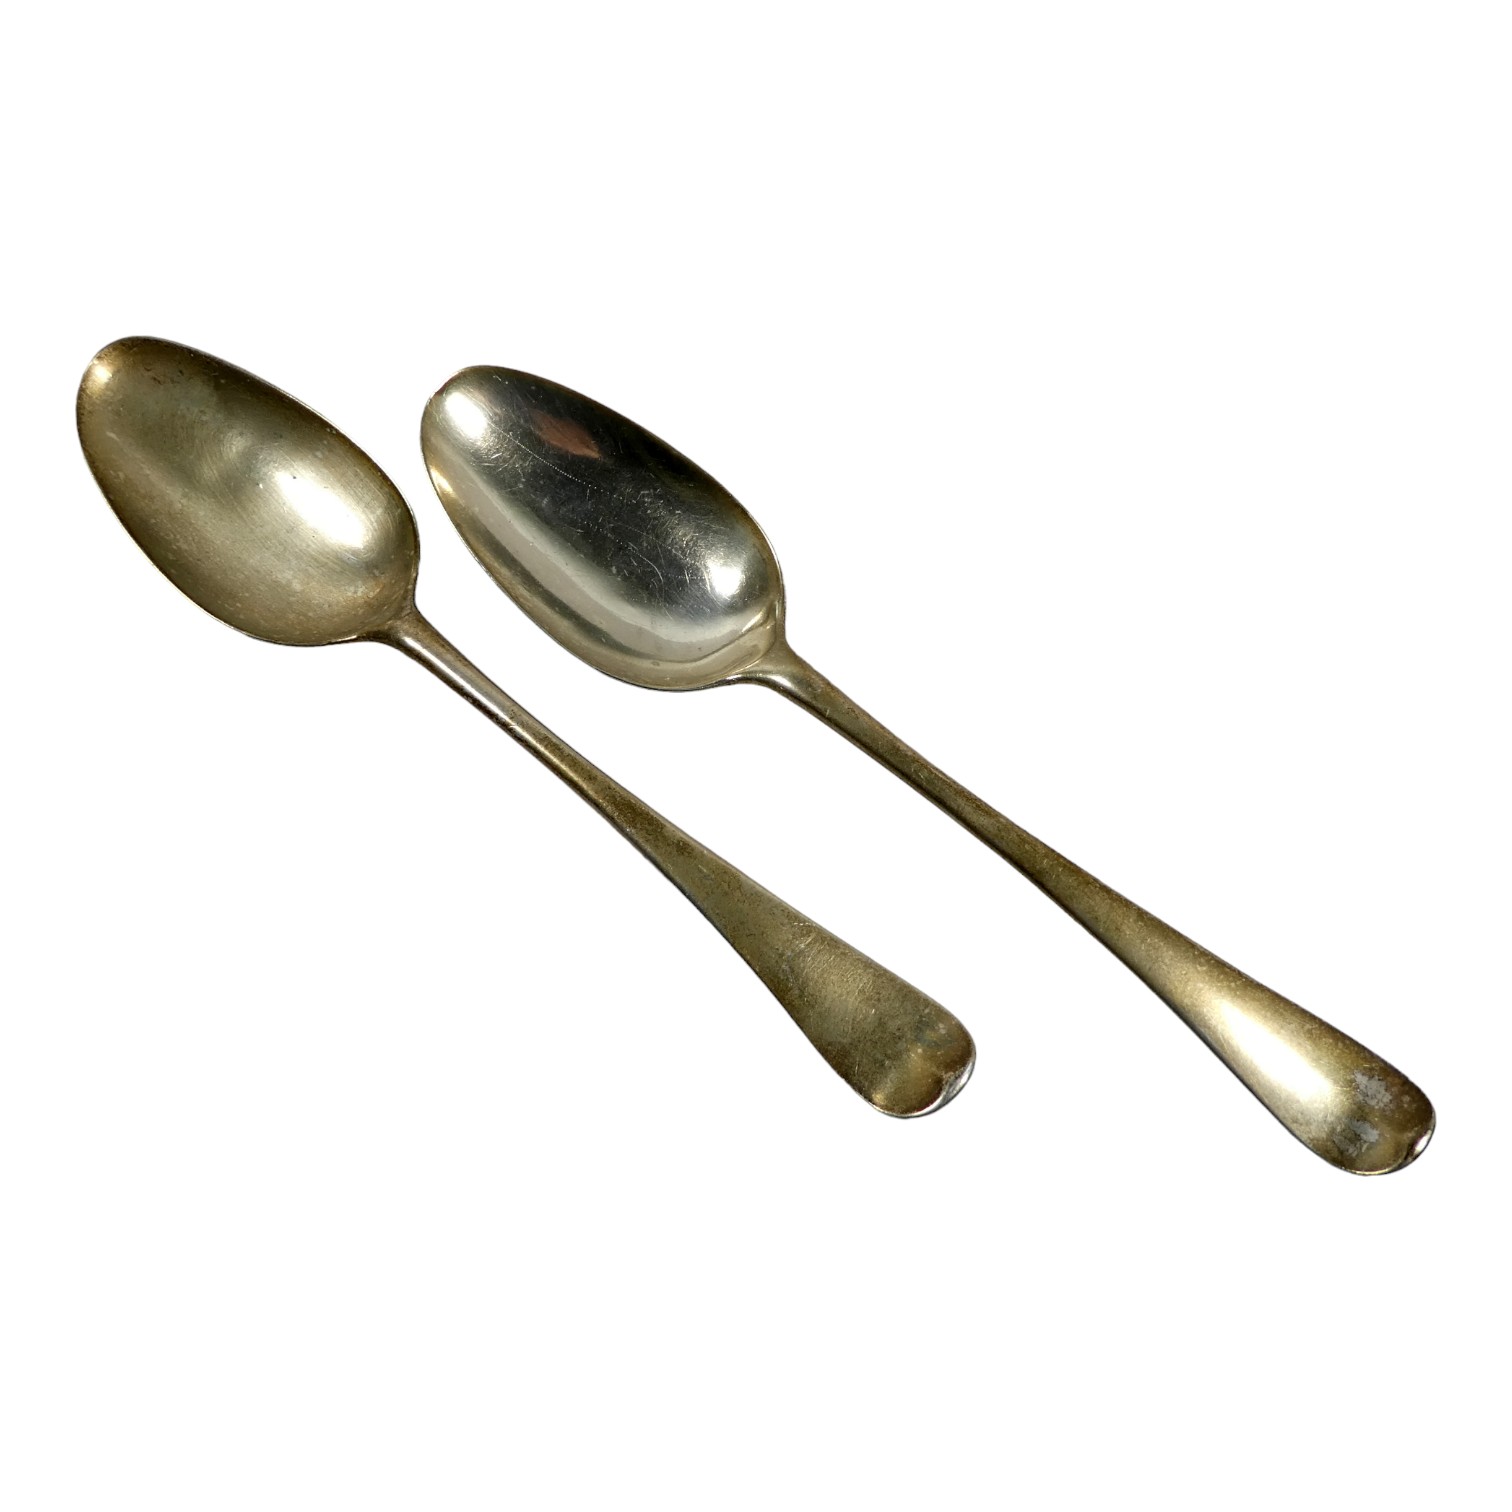 A pair of silver spoons - indistinct London marks, weight 110g, together with a white metal punch - Bild 2 aus 11